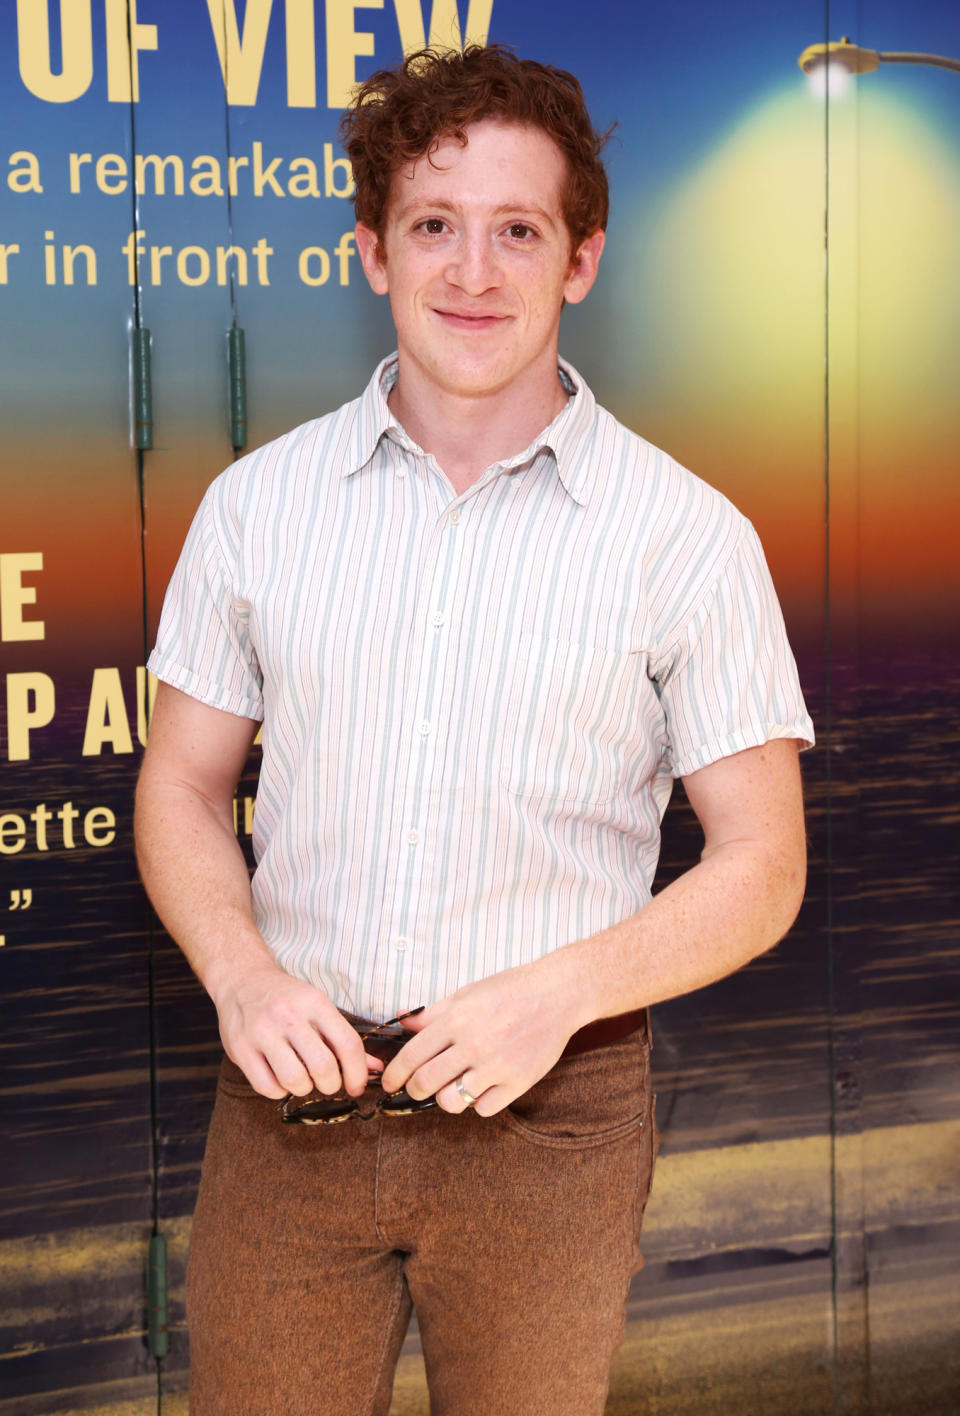 From Broadway to Boq